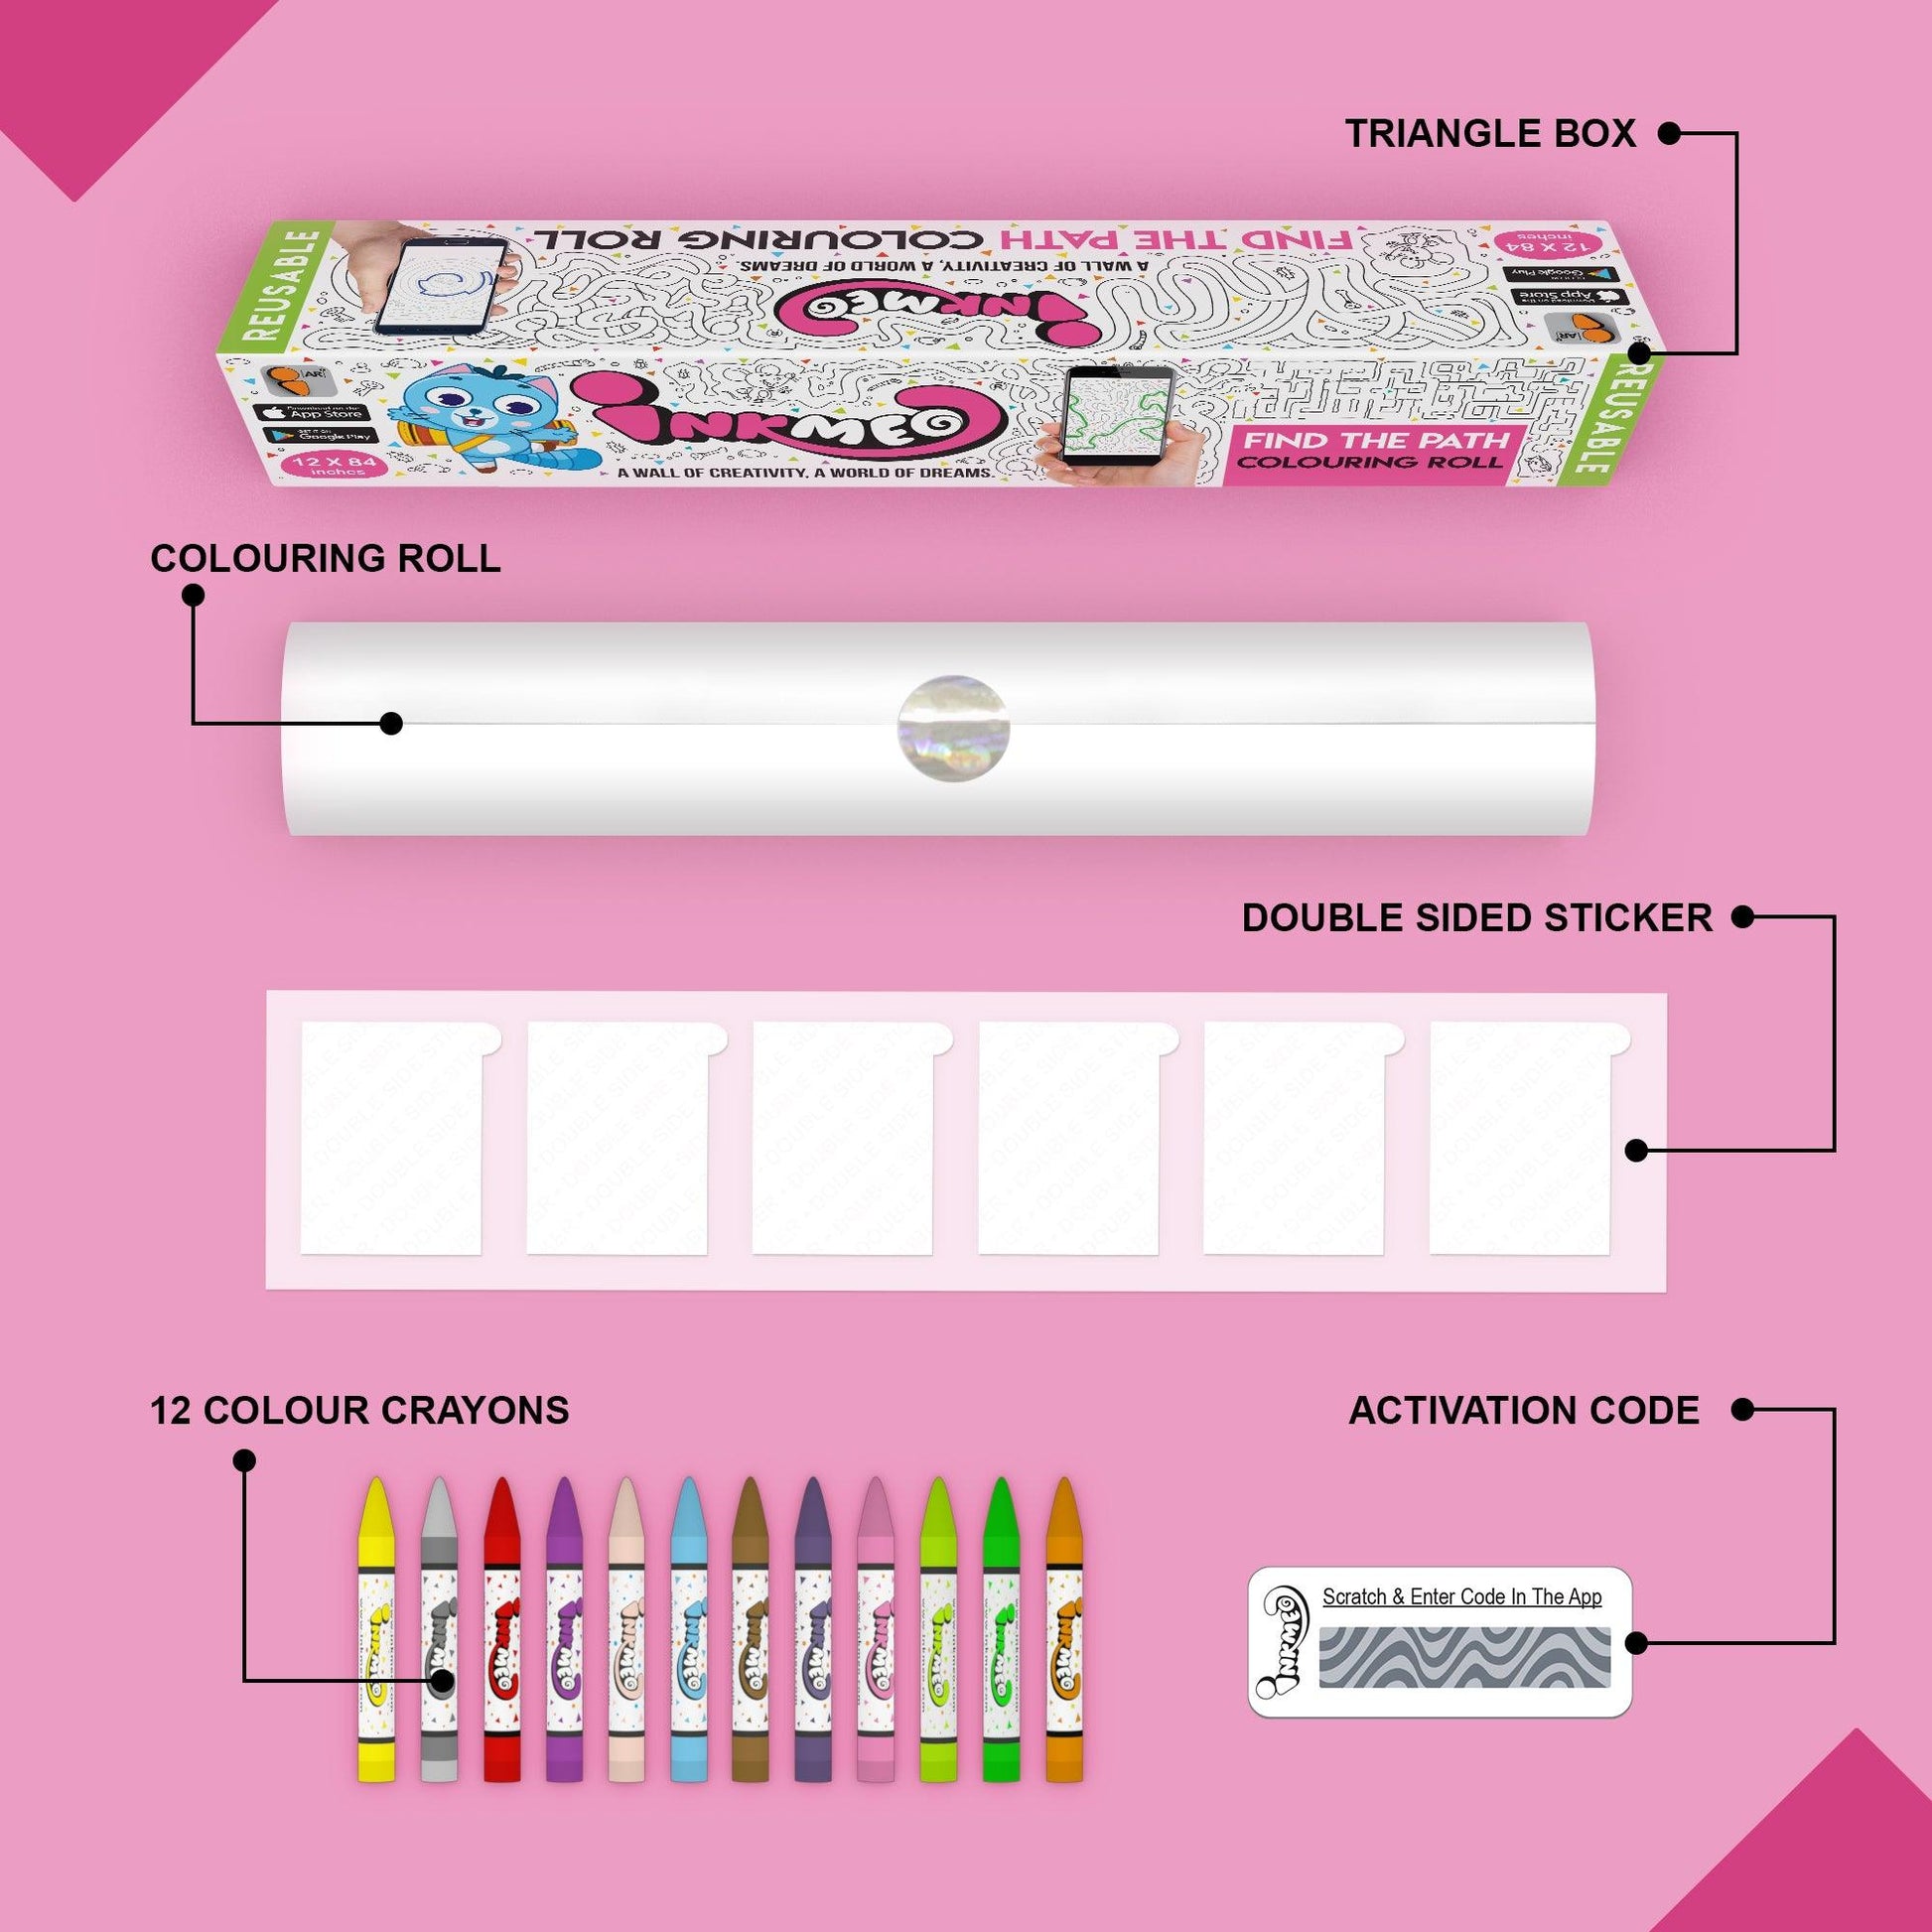 The image depicts a pink background with a single triangular box, a coloring roll, 6 double-sided stickers, 12 colored crayons, and an activation code.